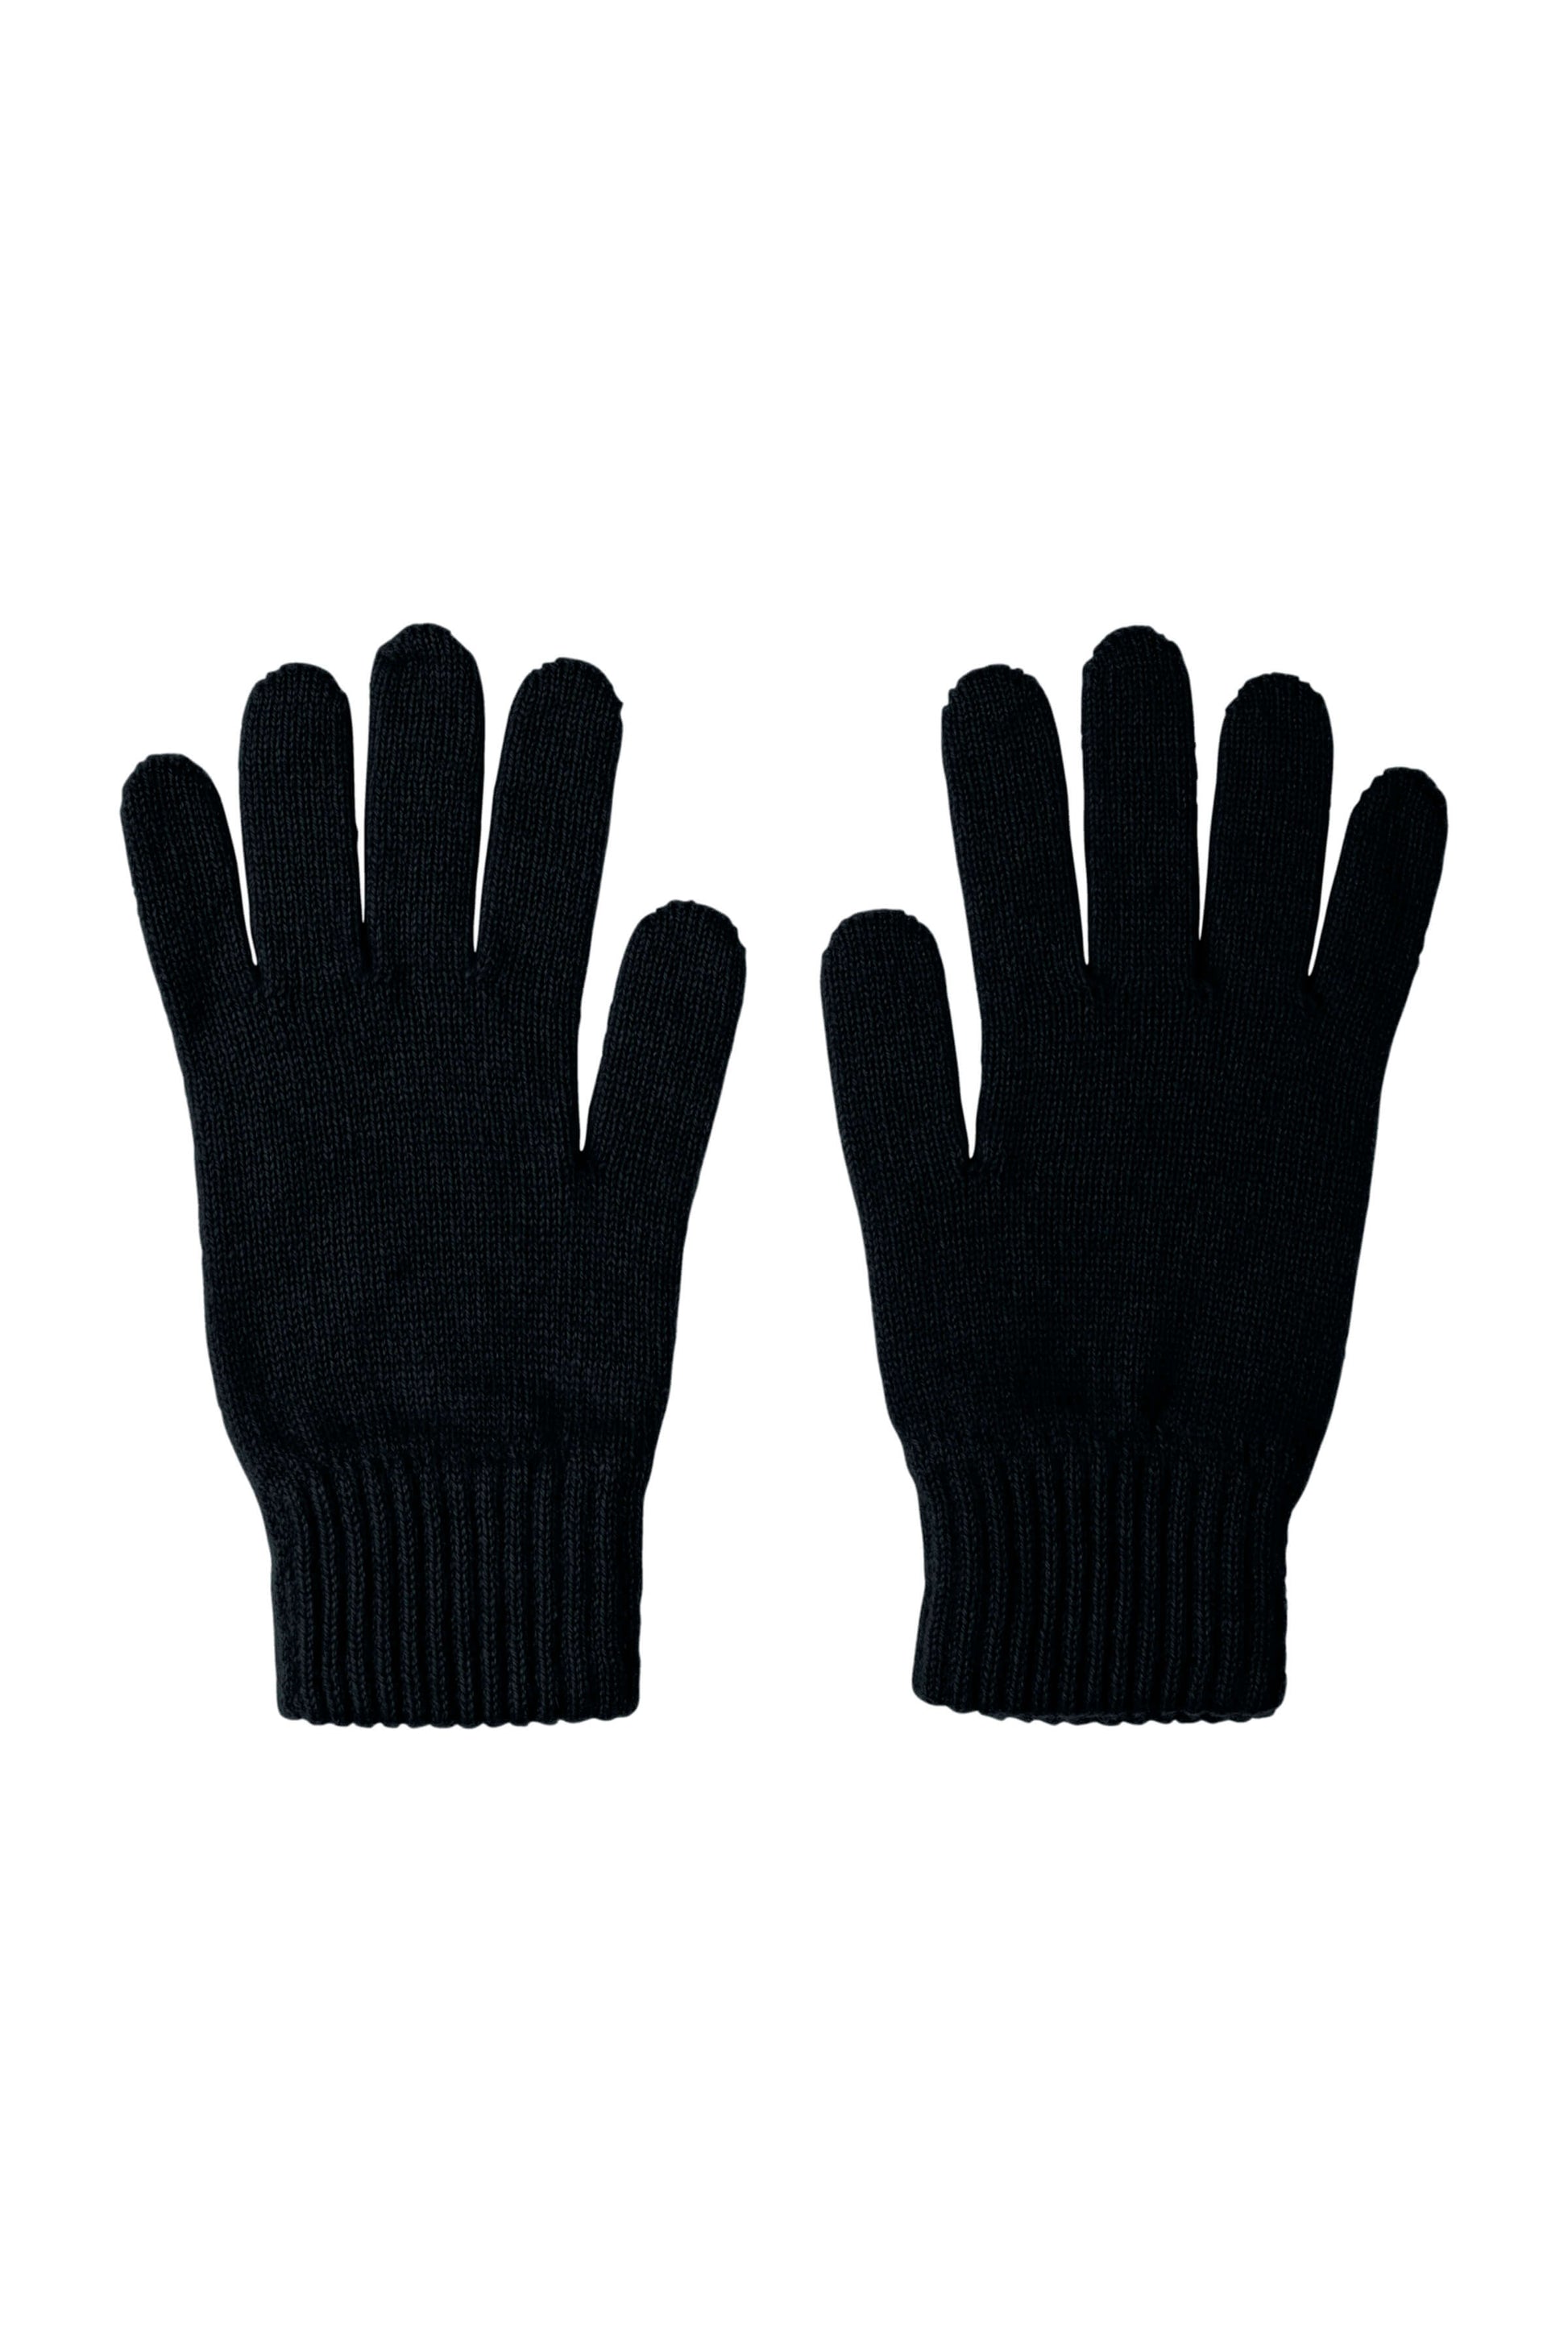 Johnstons of Elgin AW24 Knitted Accessory Black Men's Cashmere Gloves HAY01001SA0900N/A